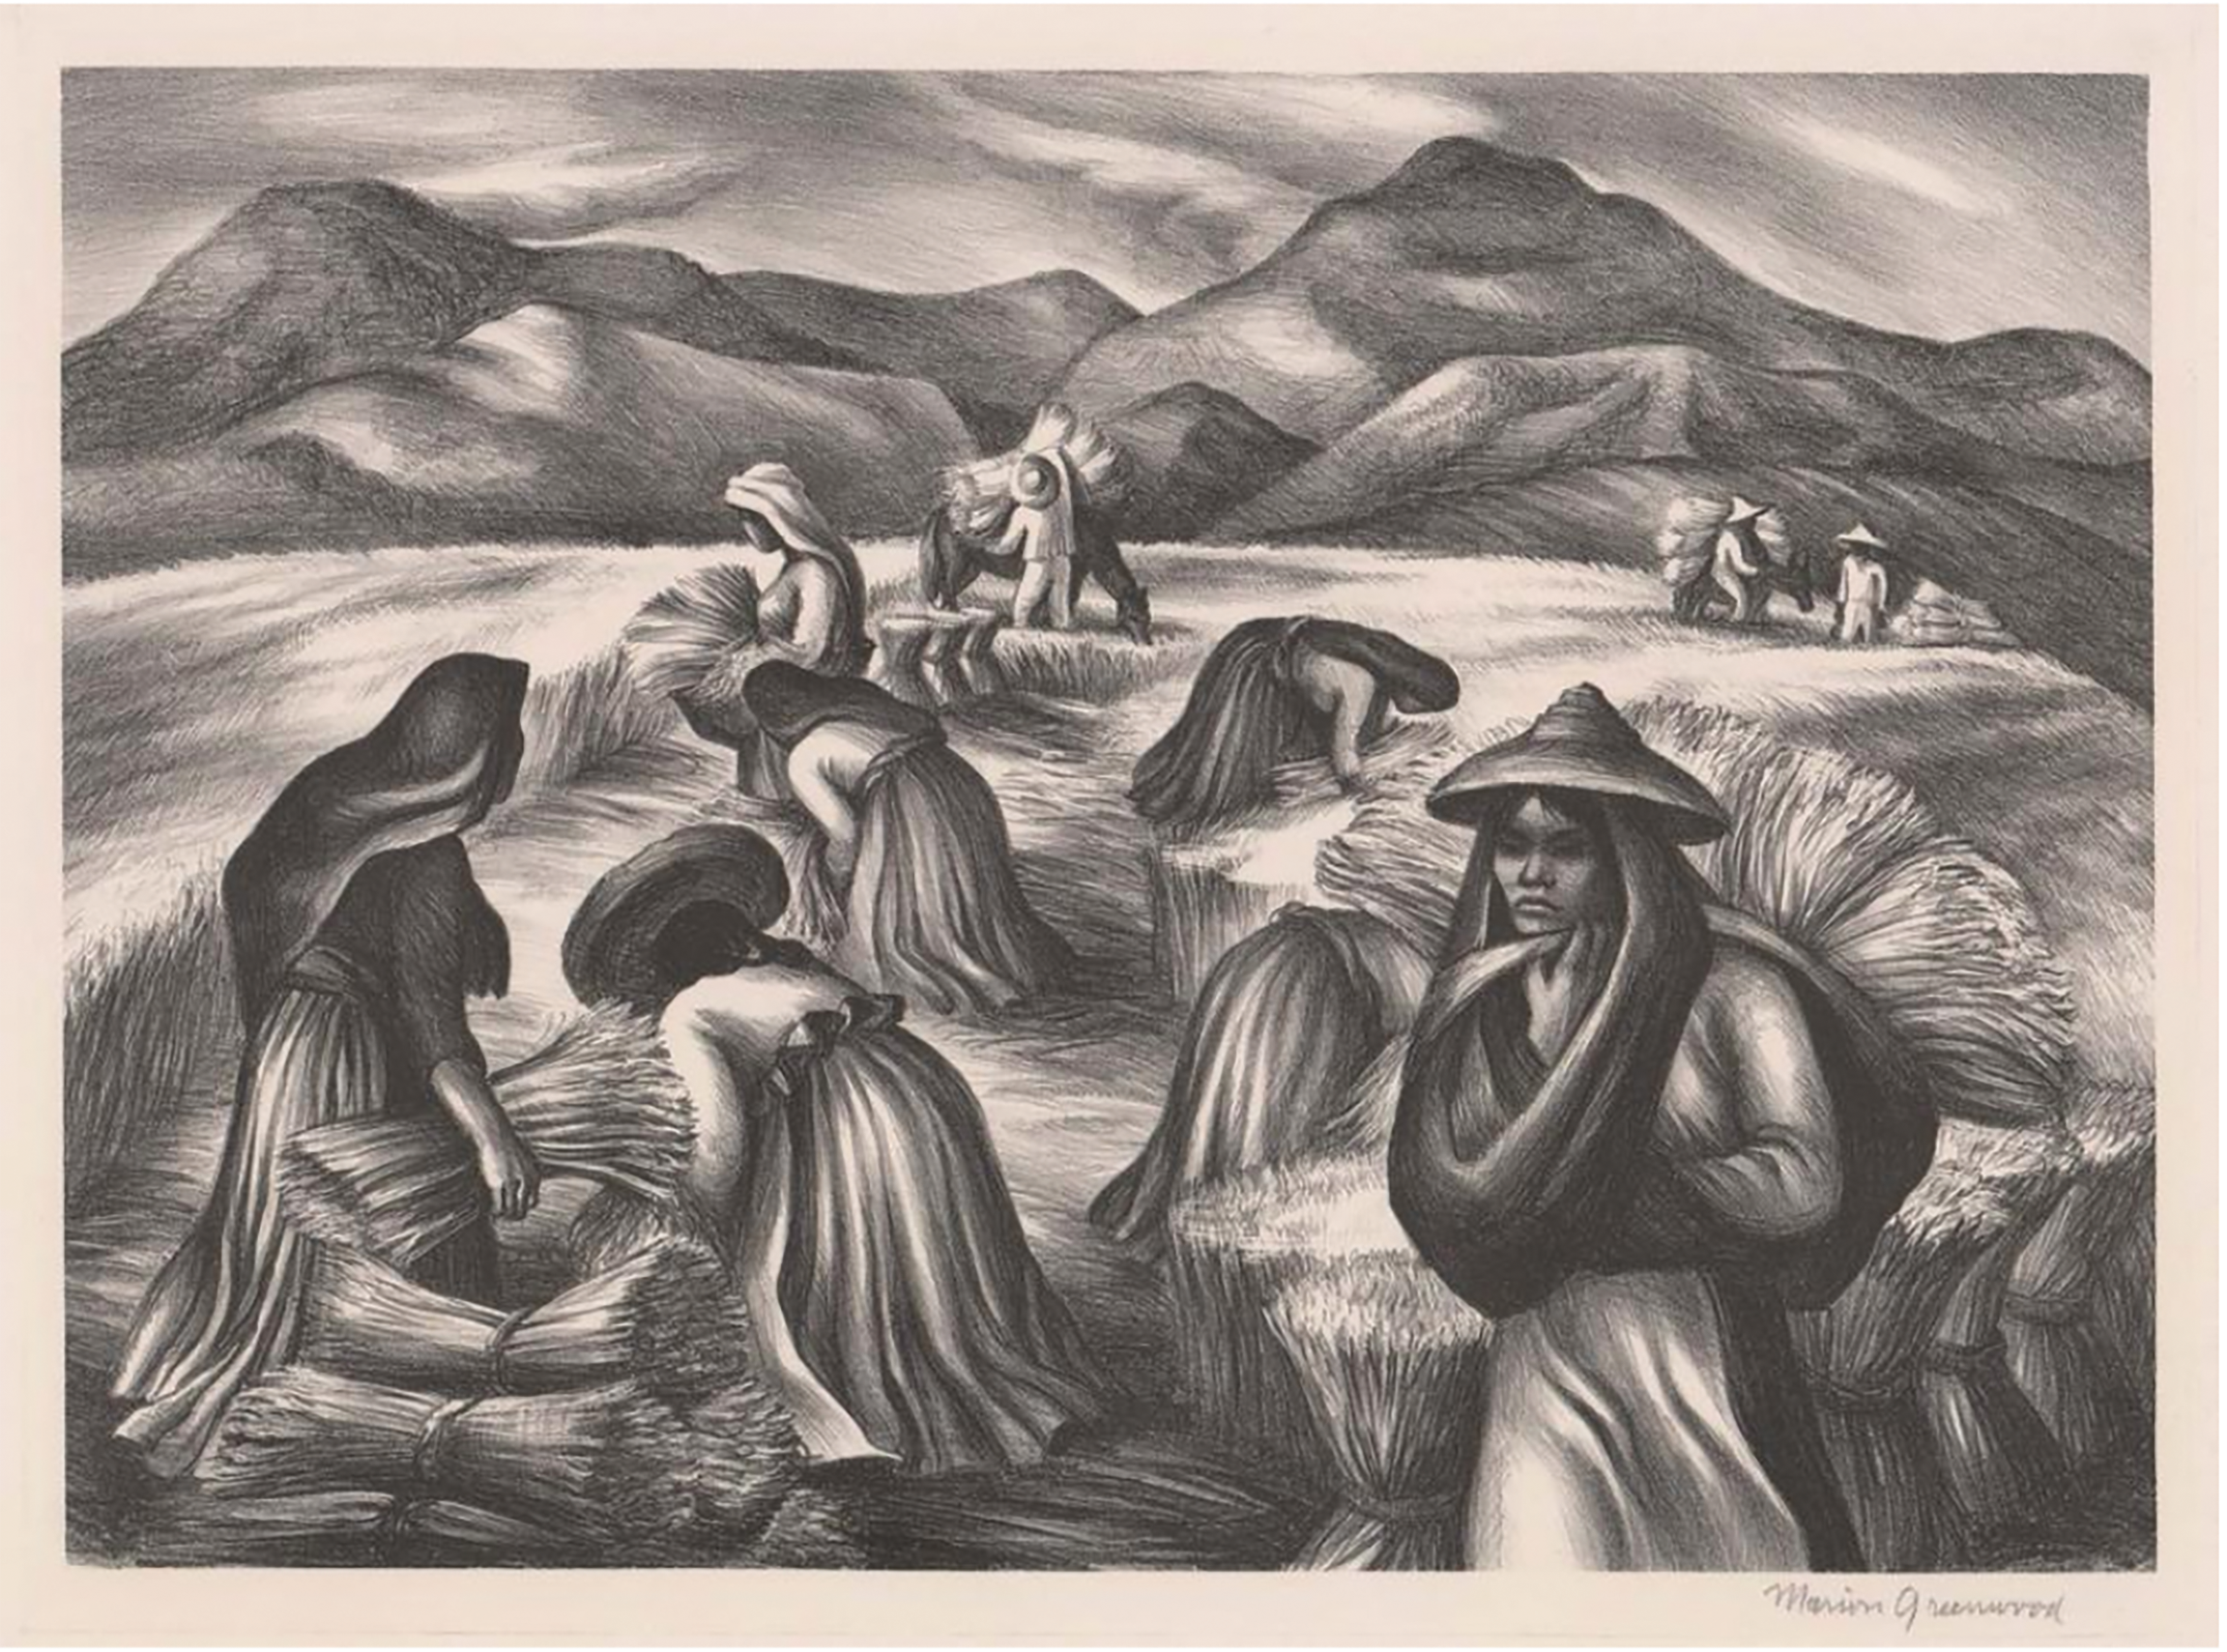 Lithograph from the Working Artists exhibition shows nine people harvesting wheat by hand throughout a field.